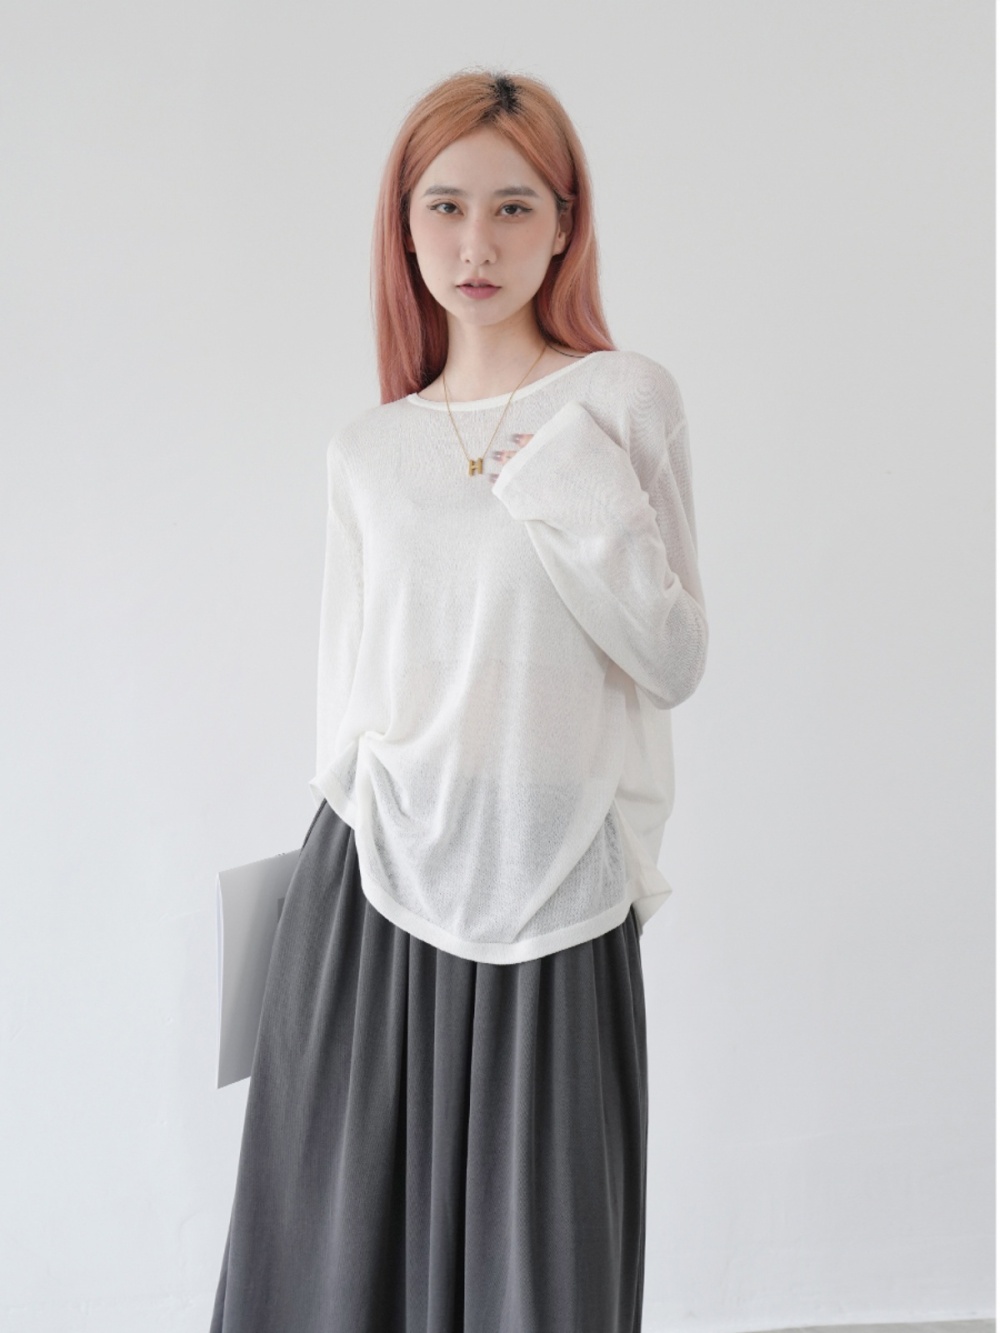 Back split simple shirts thin knitted bottoming shirt for women